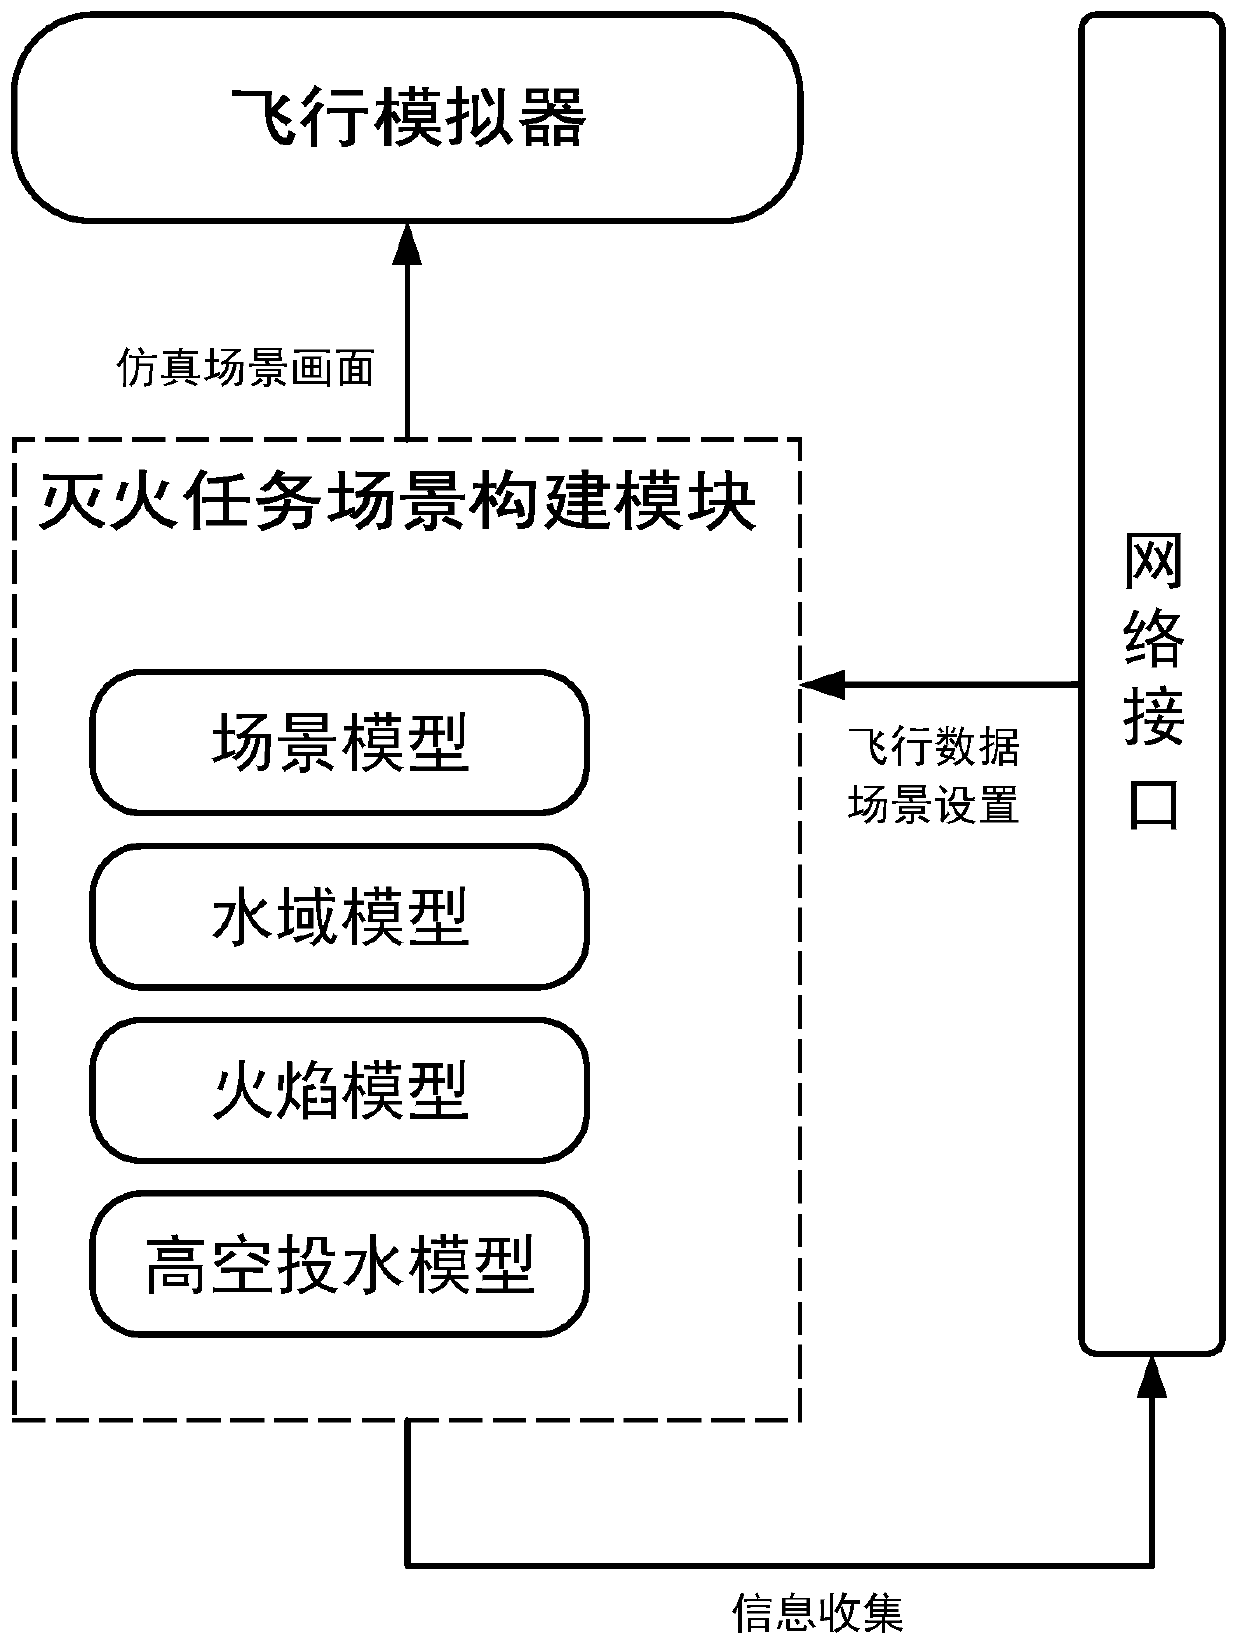 Semi-physical water throwing and drawing fire extinguishing simulation evaluation system for amphibious fire extinguishing aircraft